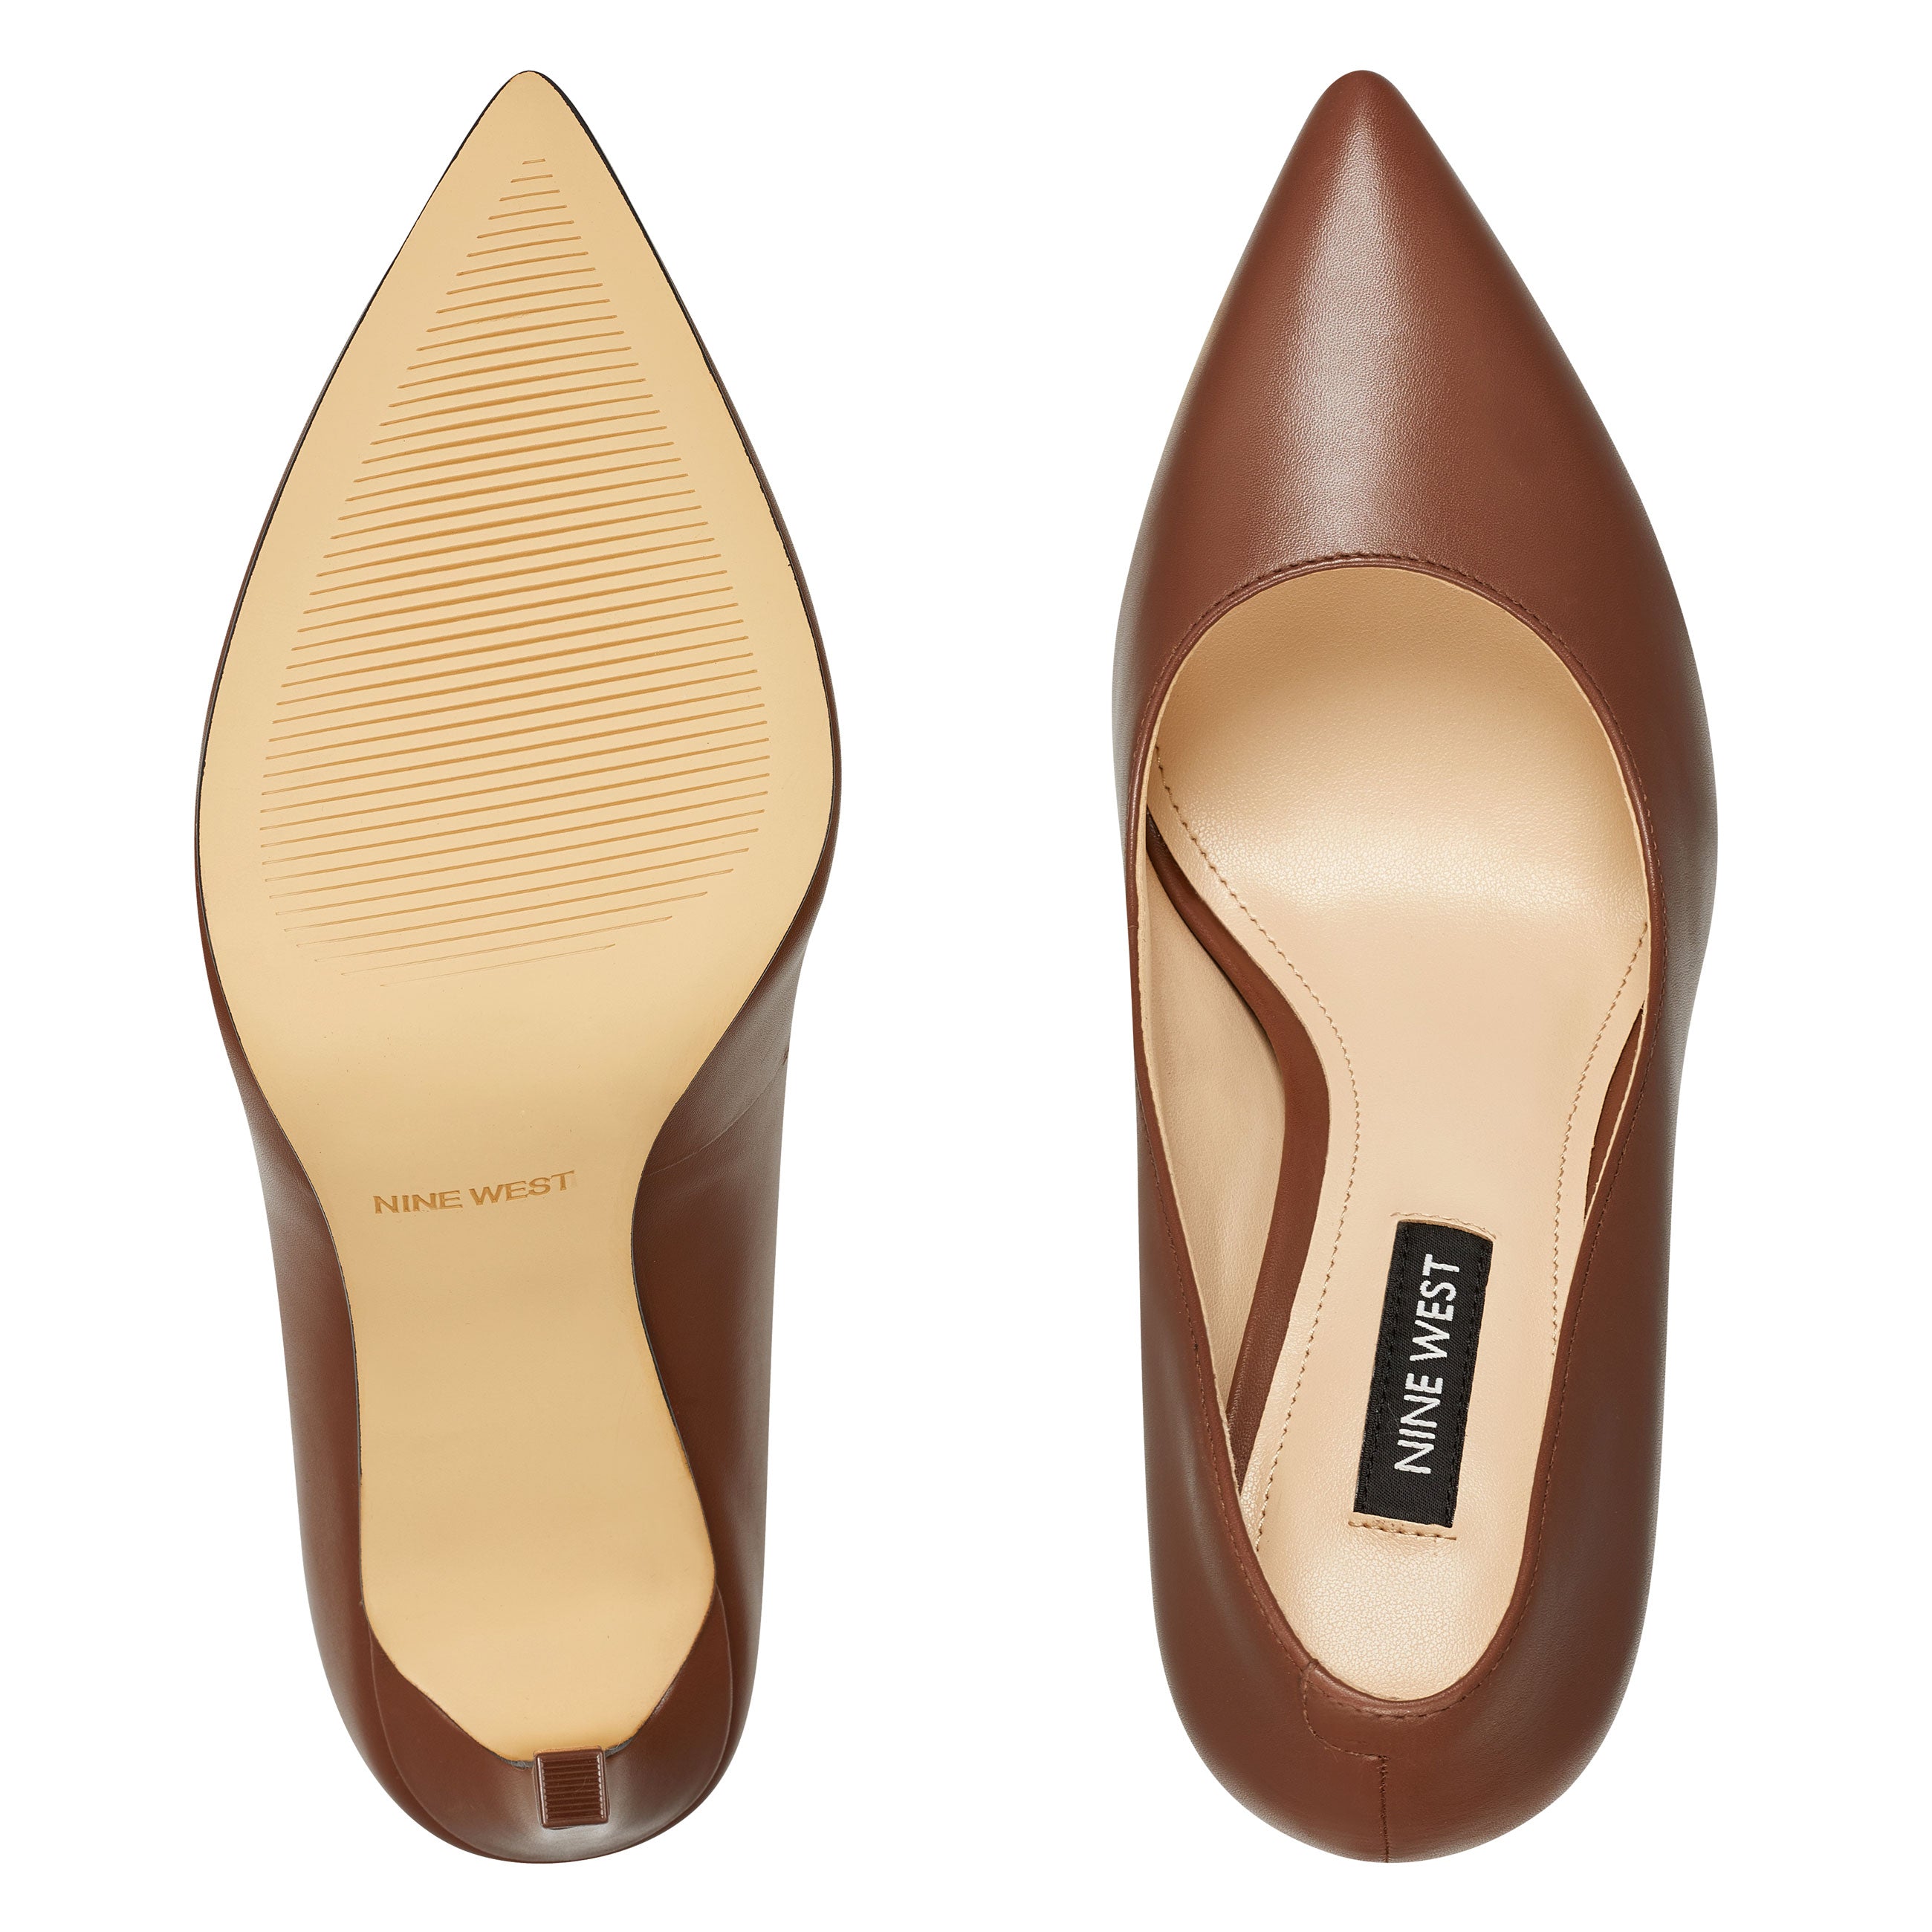 Maureen 70mm Brown Leather Stiletto Heels | Malone Souliers